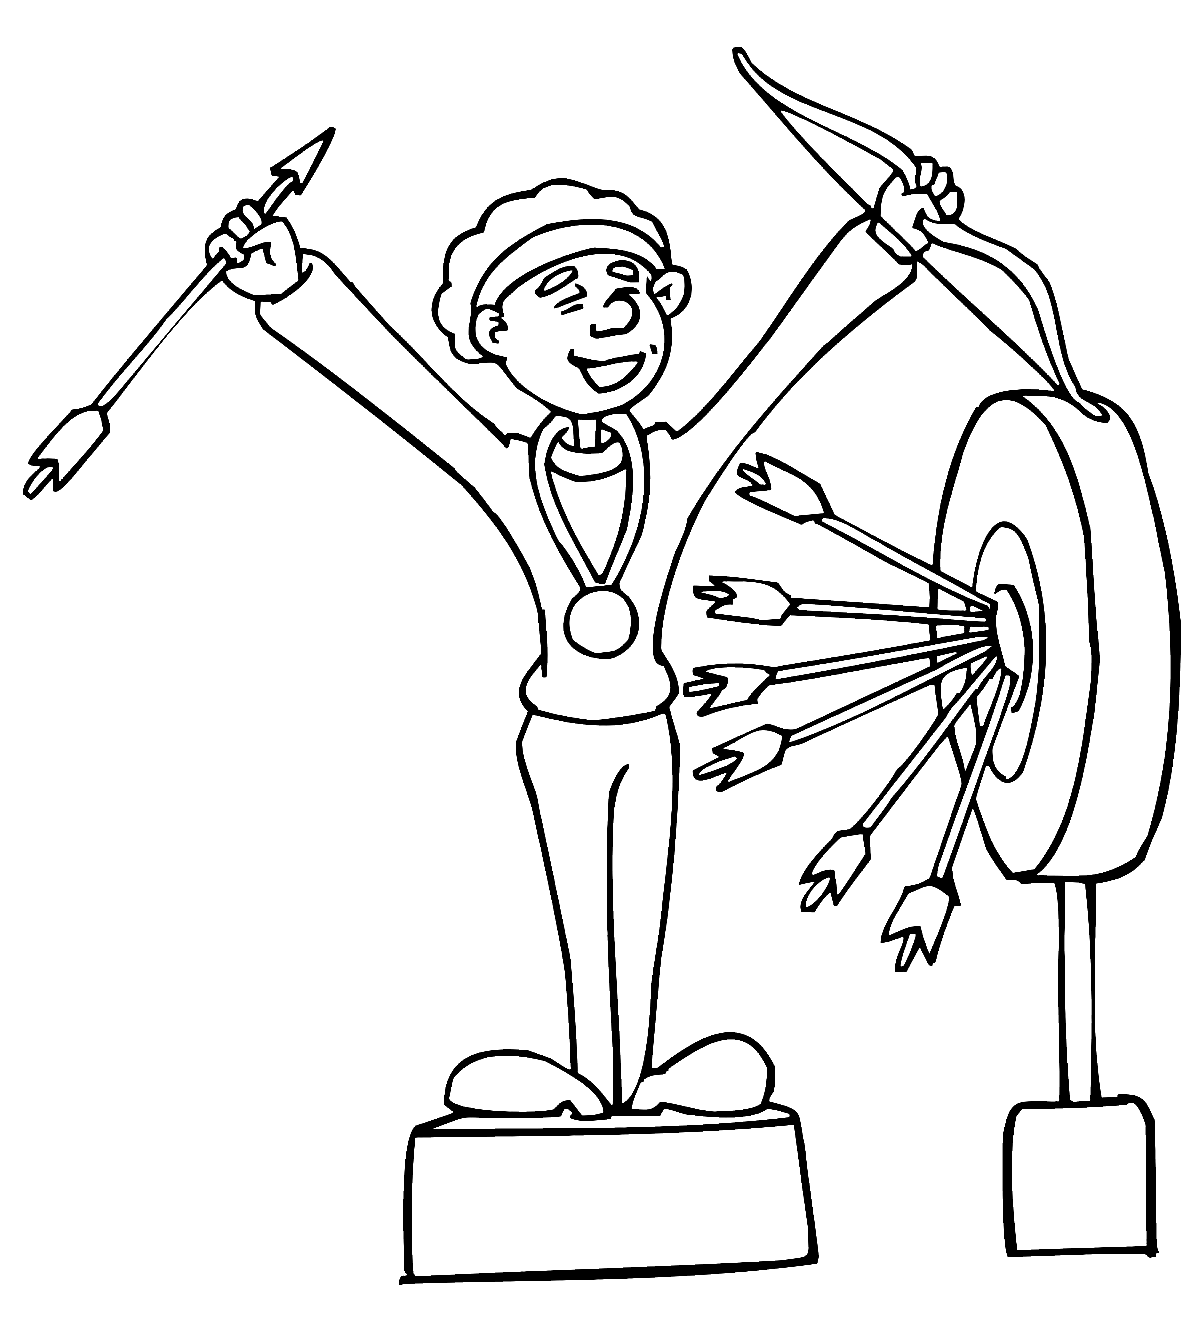 Archery Competition Winner Coloring Page